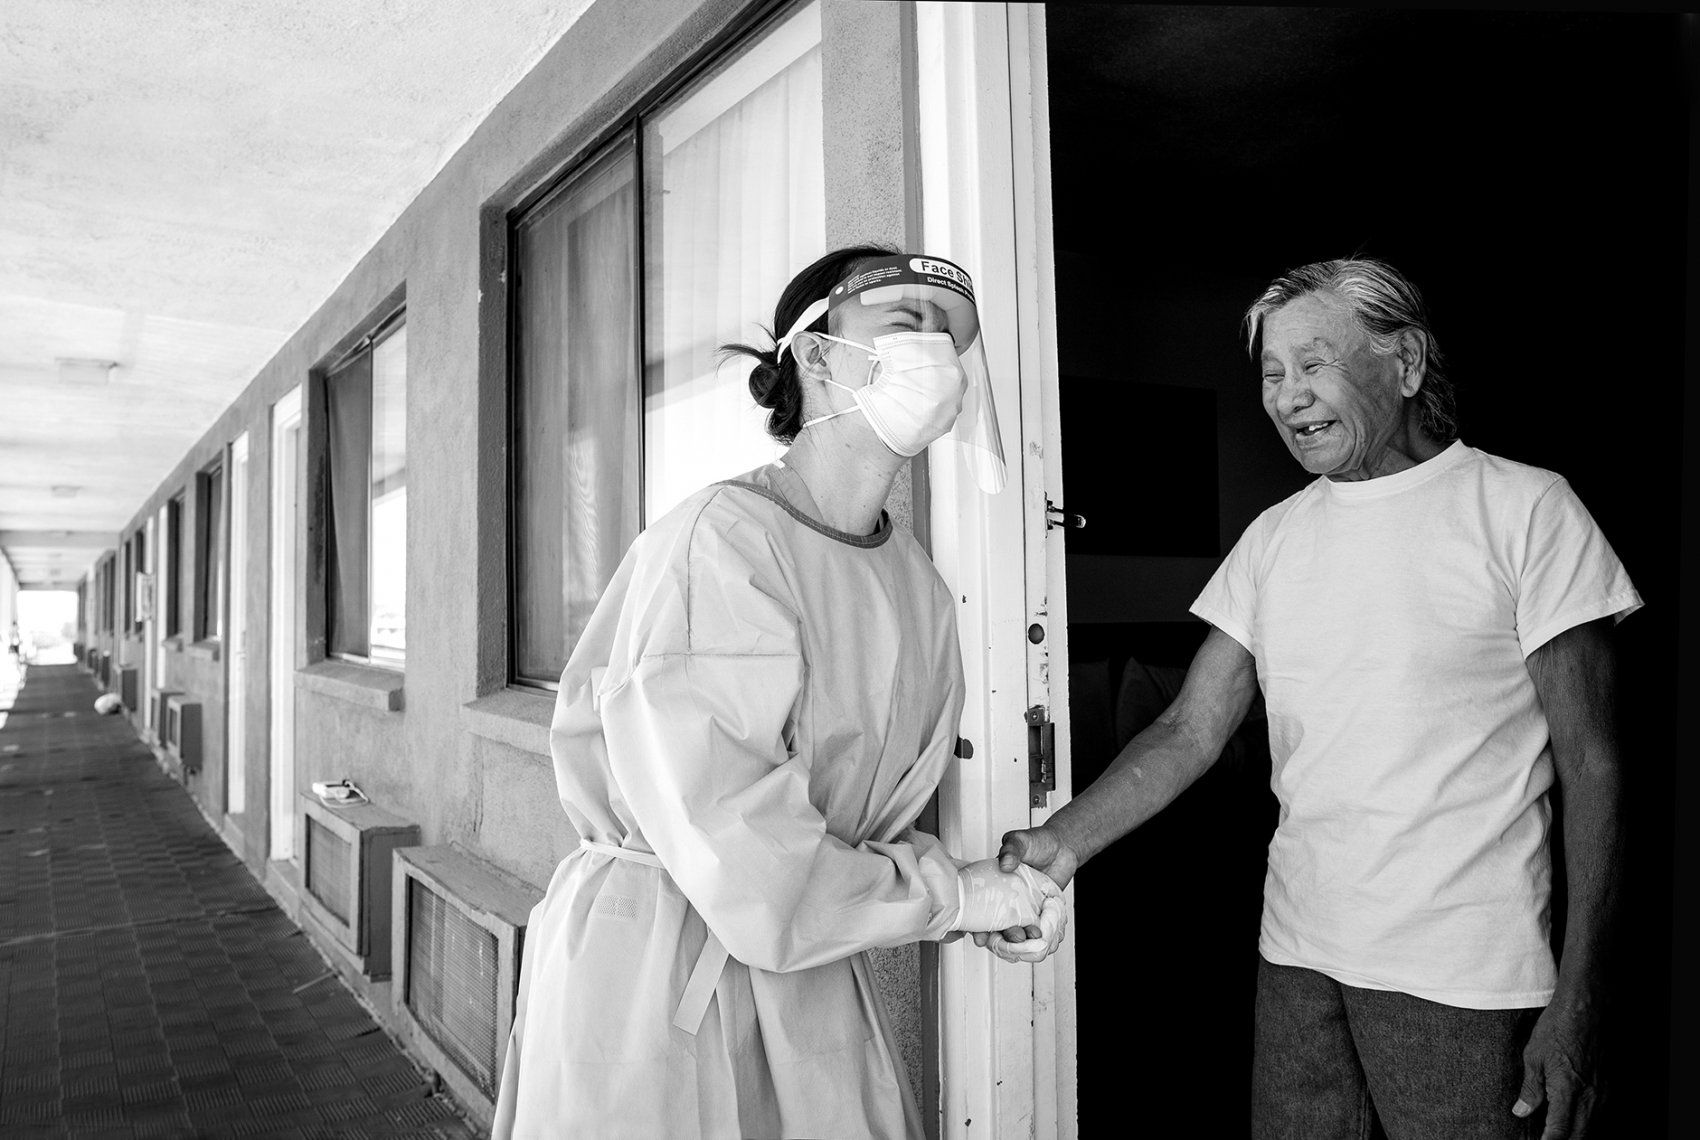 medical worker talks with a man in a motel doorway